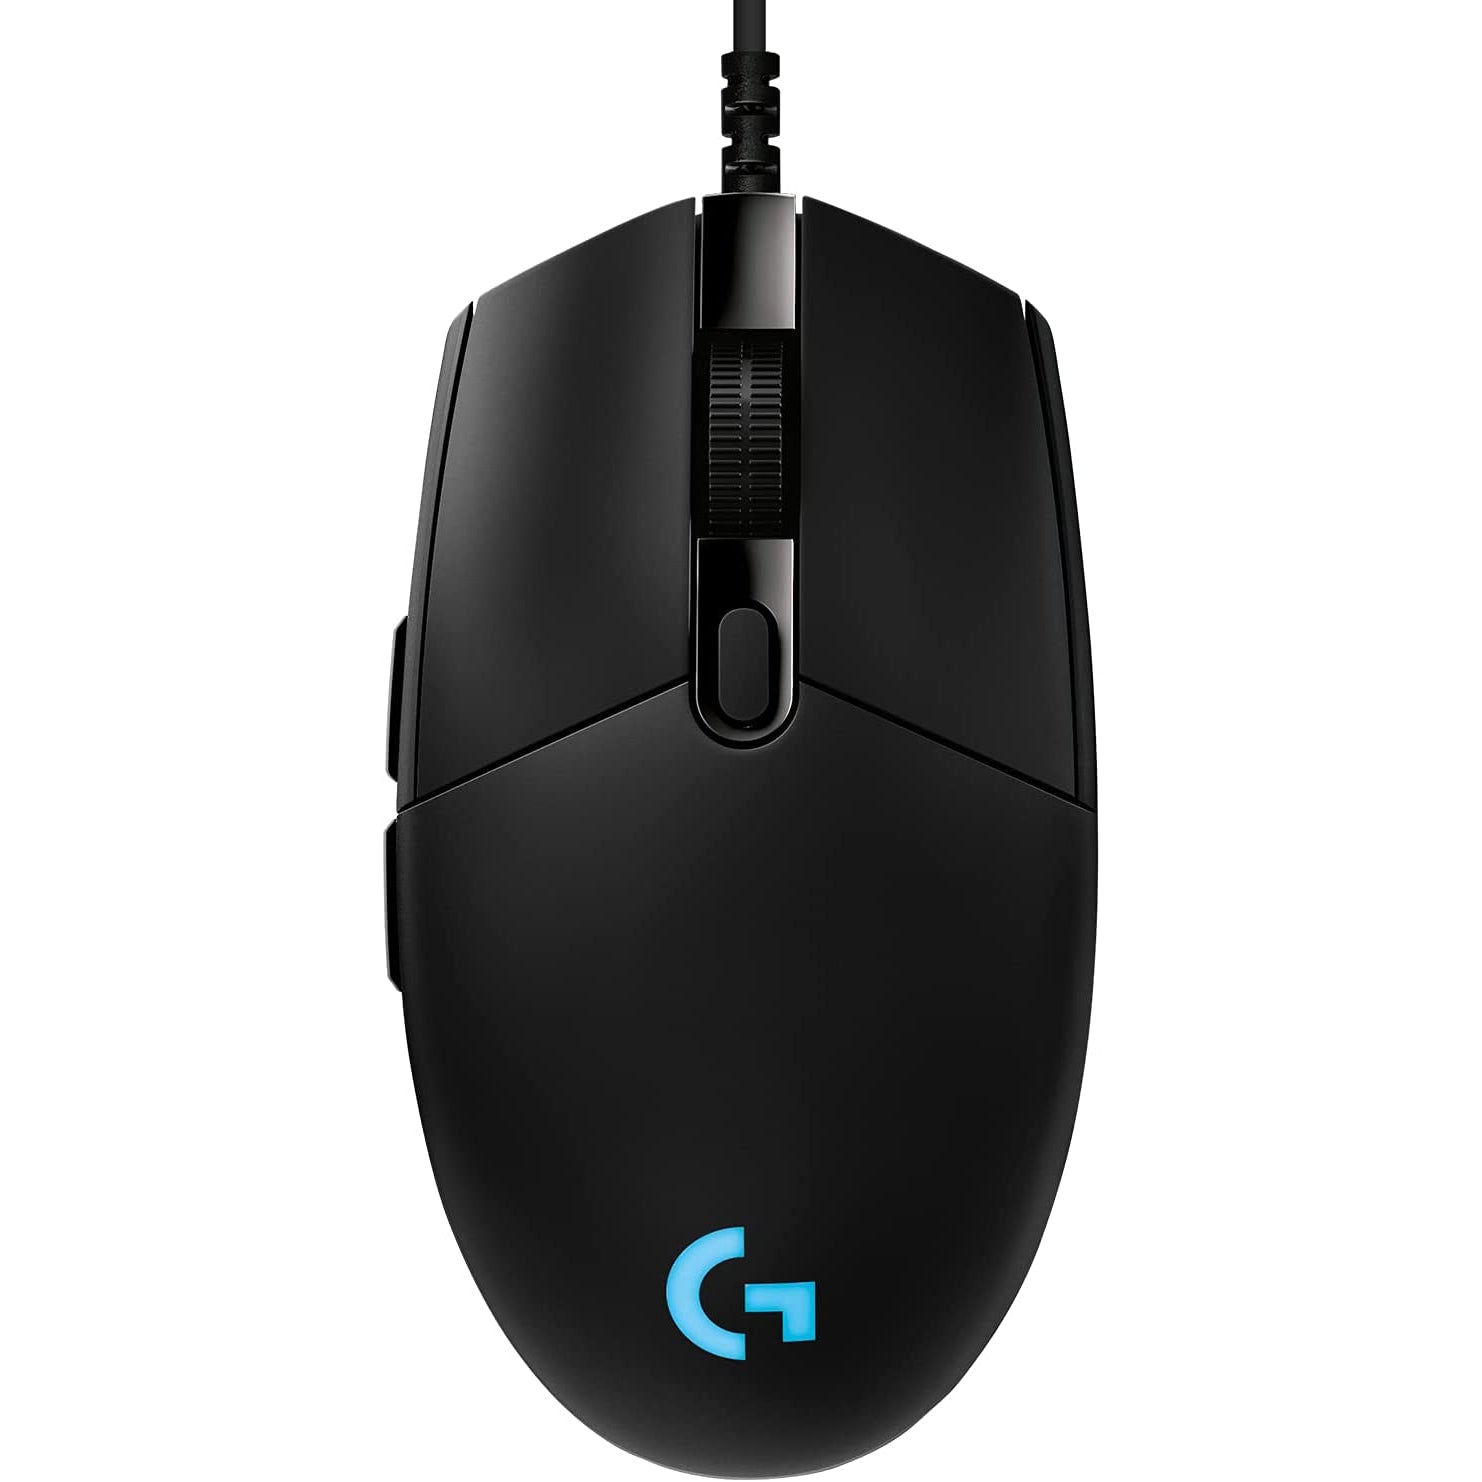 Logitech G PRO Hero Wired Gaming Mouse, Black